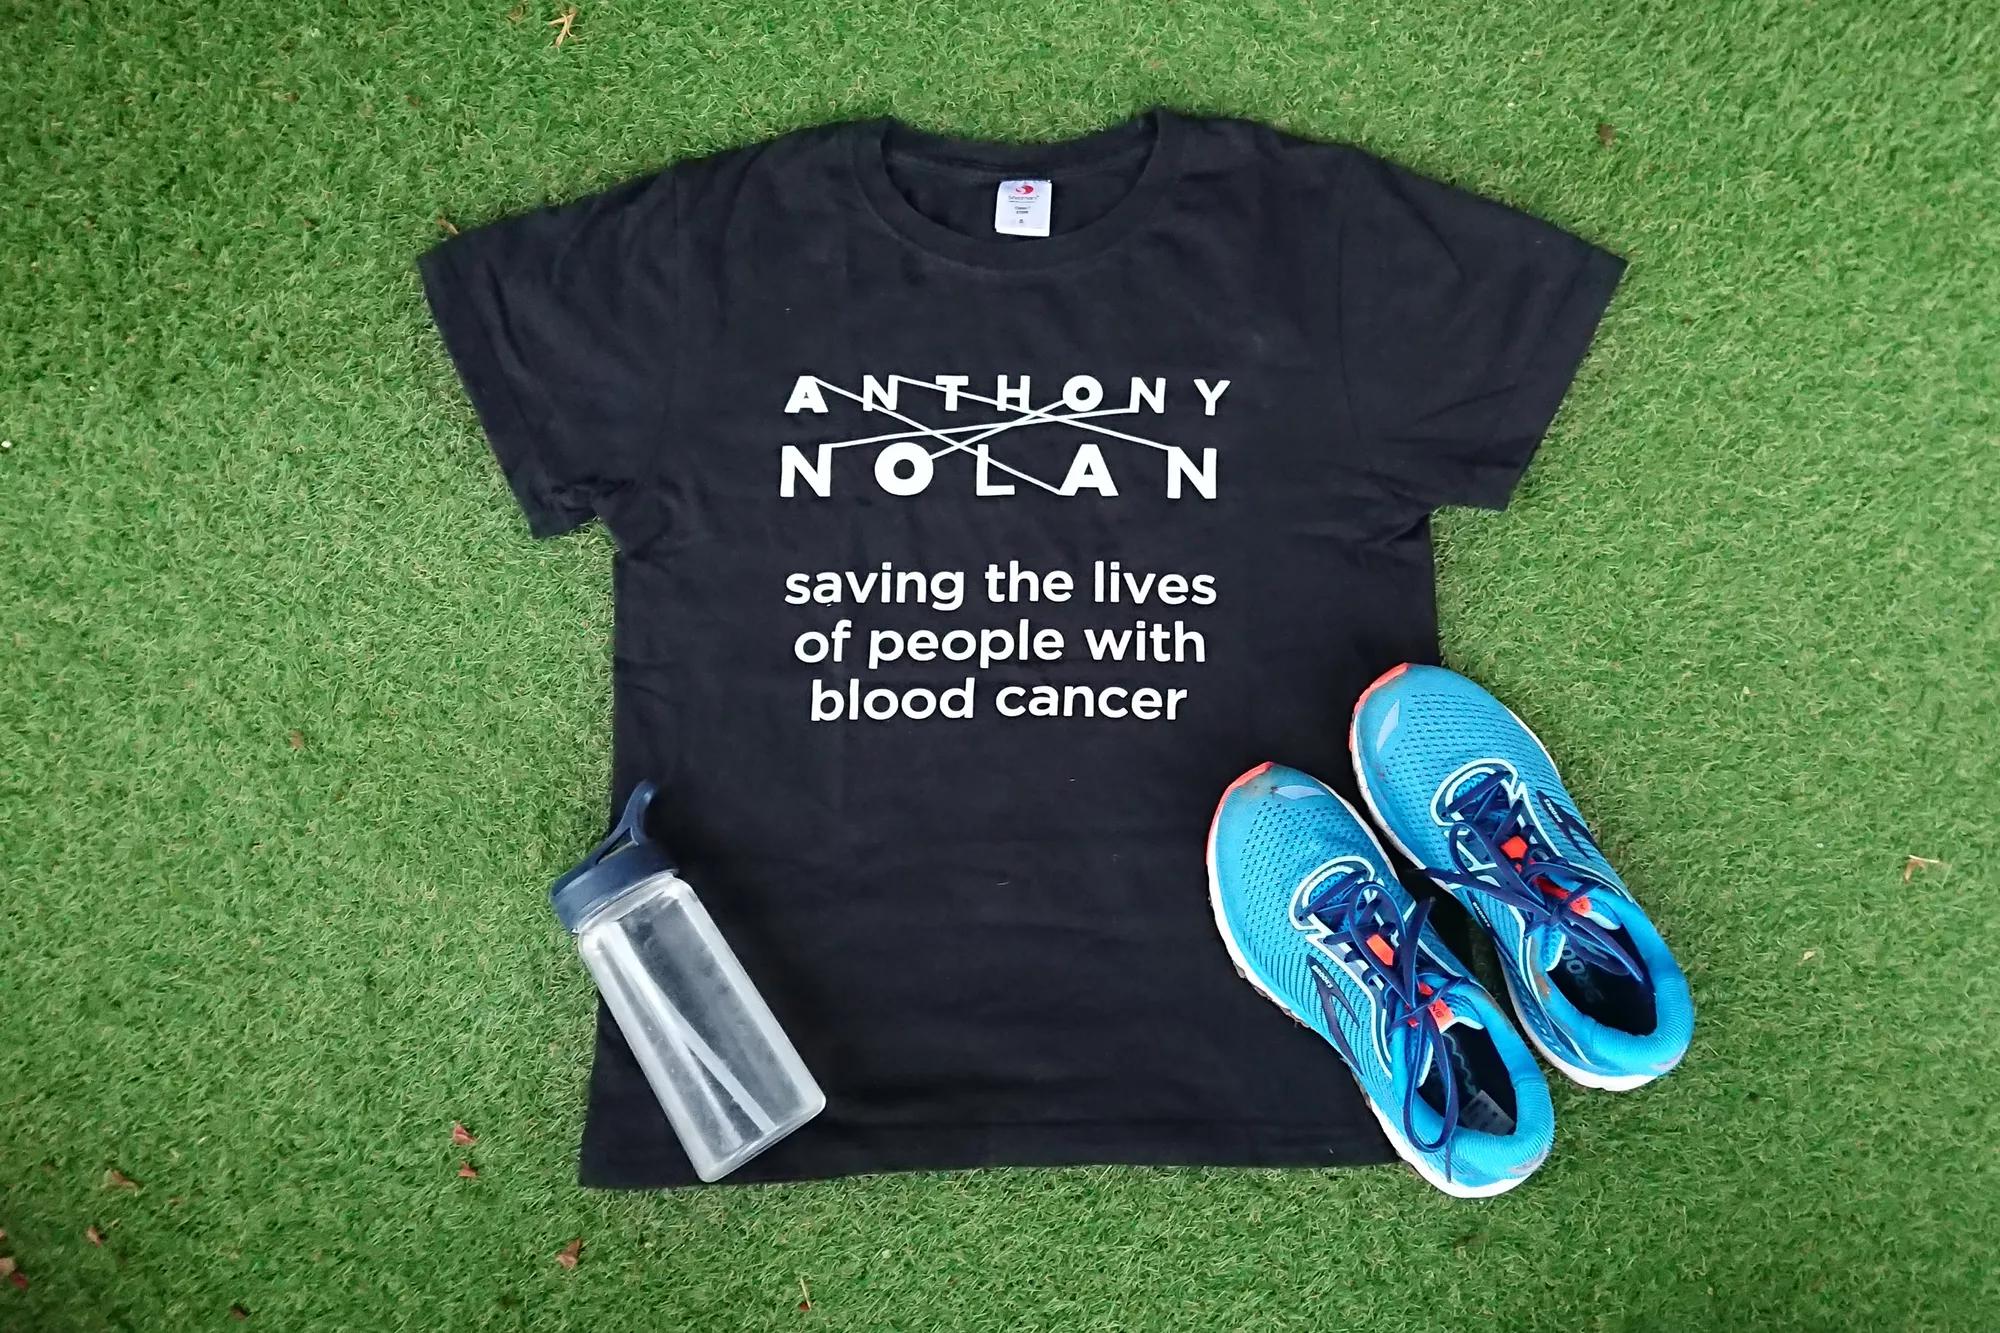 Anthony Nolan t-shirt, water bottle and running shoes